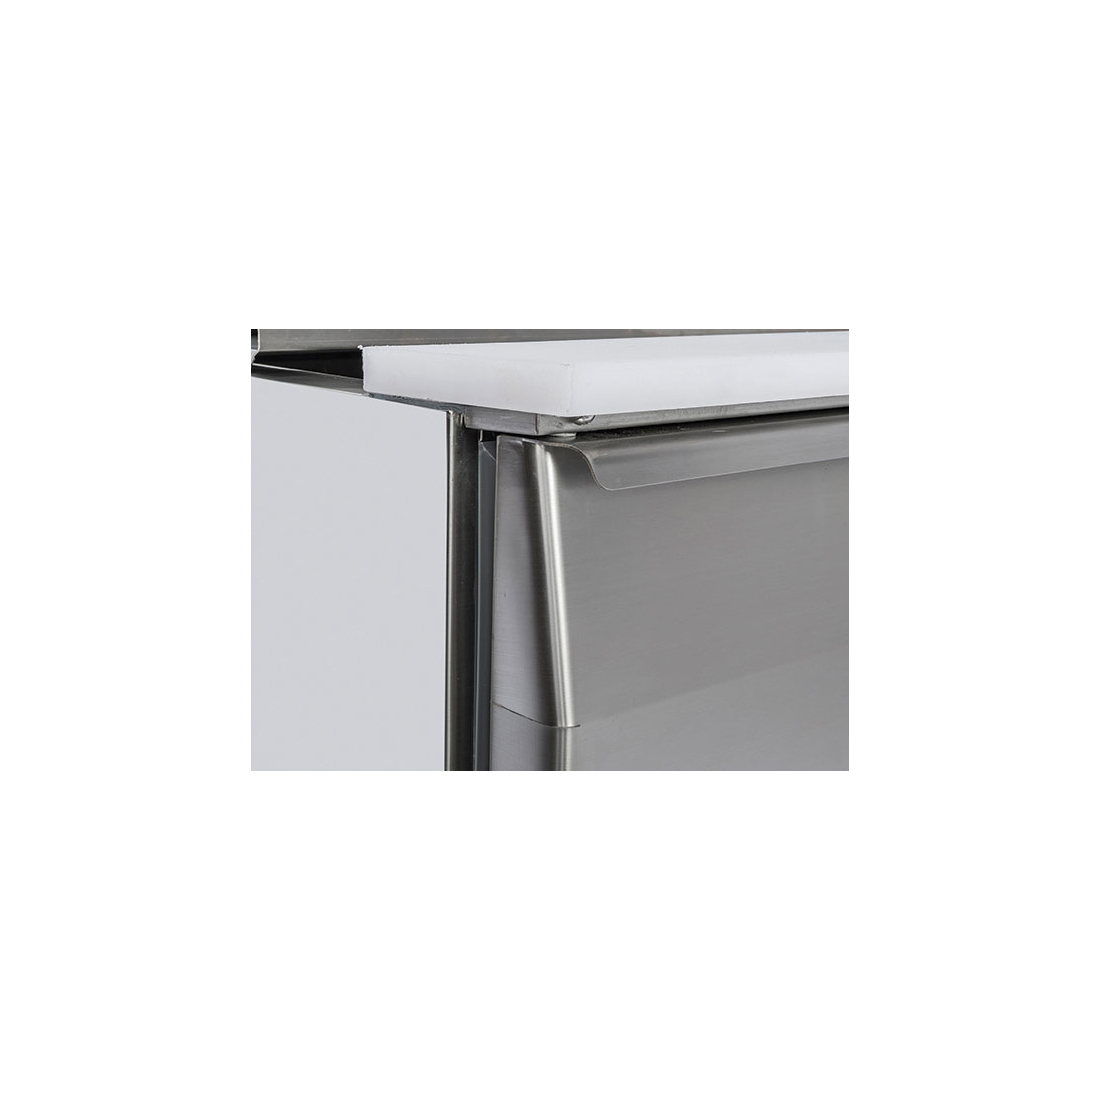 COOL HEAD ,CR45, Stainless Steel, Door, Saladette with Sliding Top|mkayn|مكاين